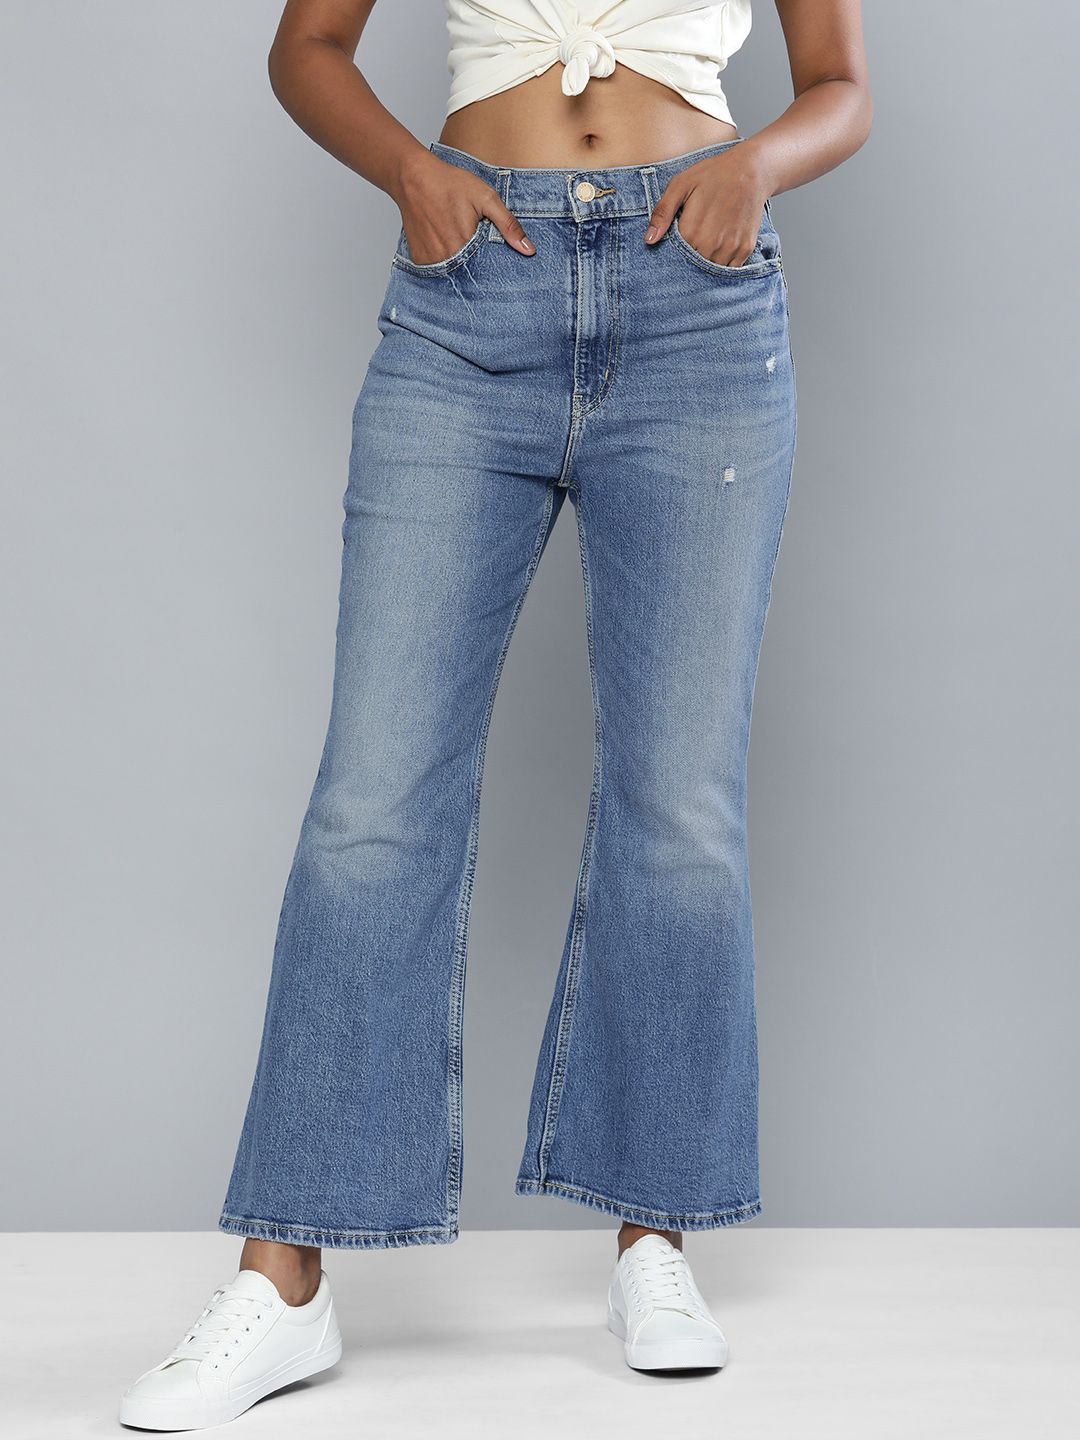 Levis X Deepika Padukone Women Blue 70S Wide Leg High-Rise Light Fade Stretchable Jeans Price in India